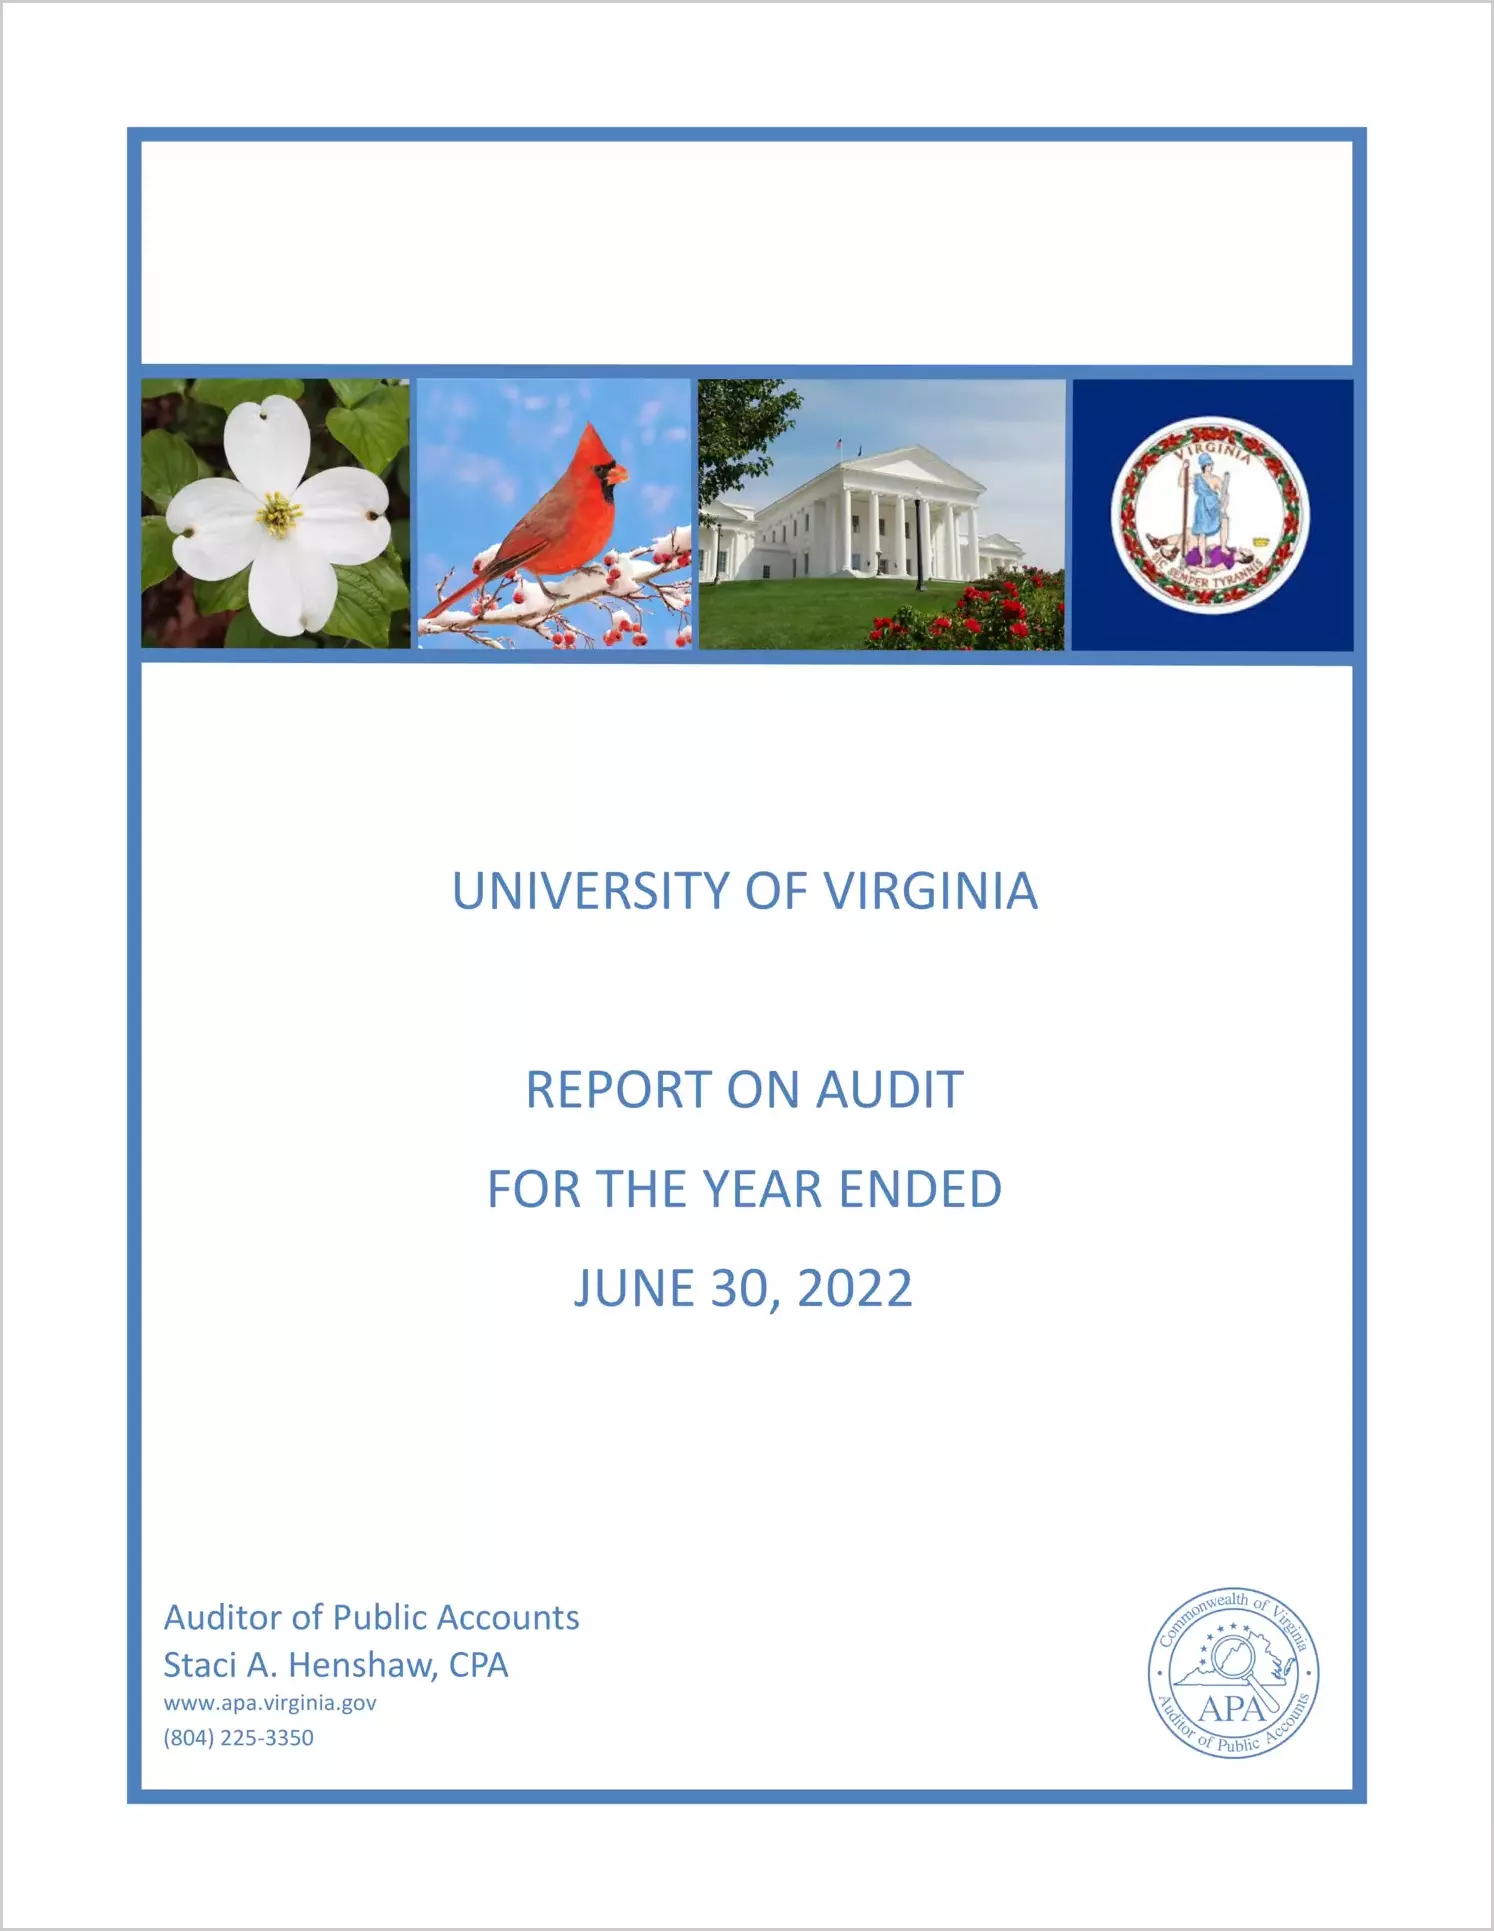 University of Virginia for the year ended June 30, 2022